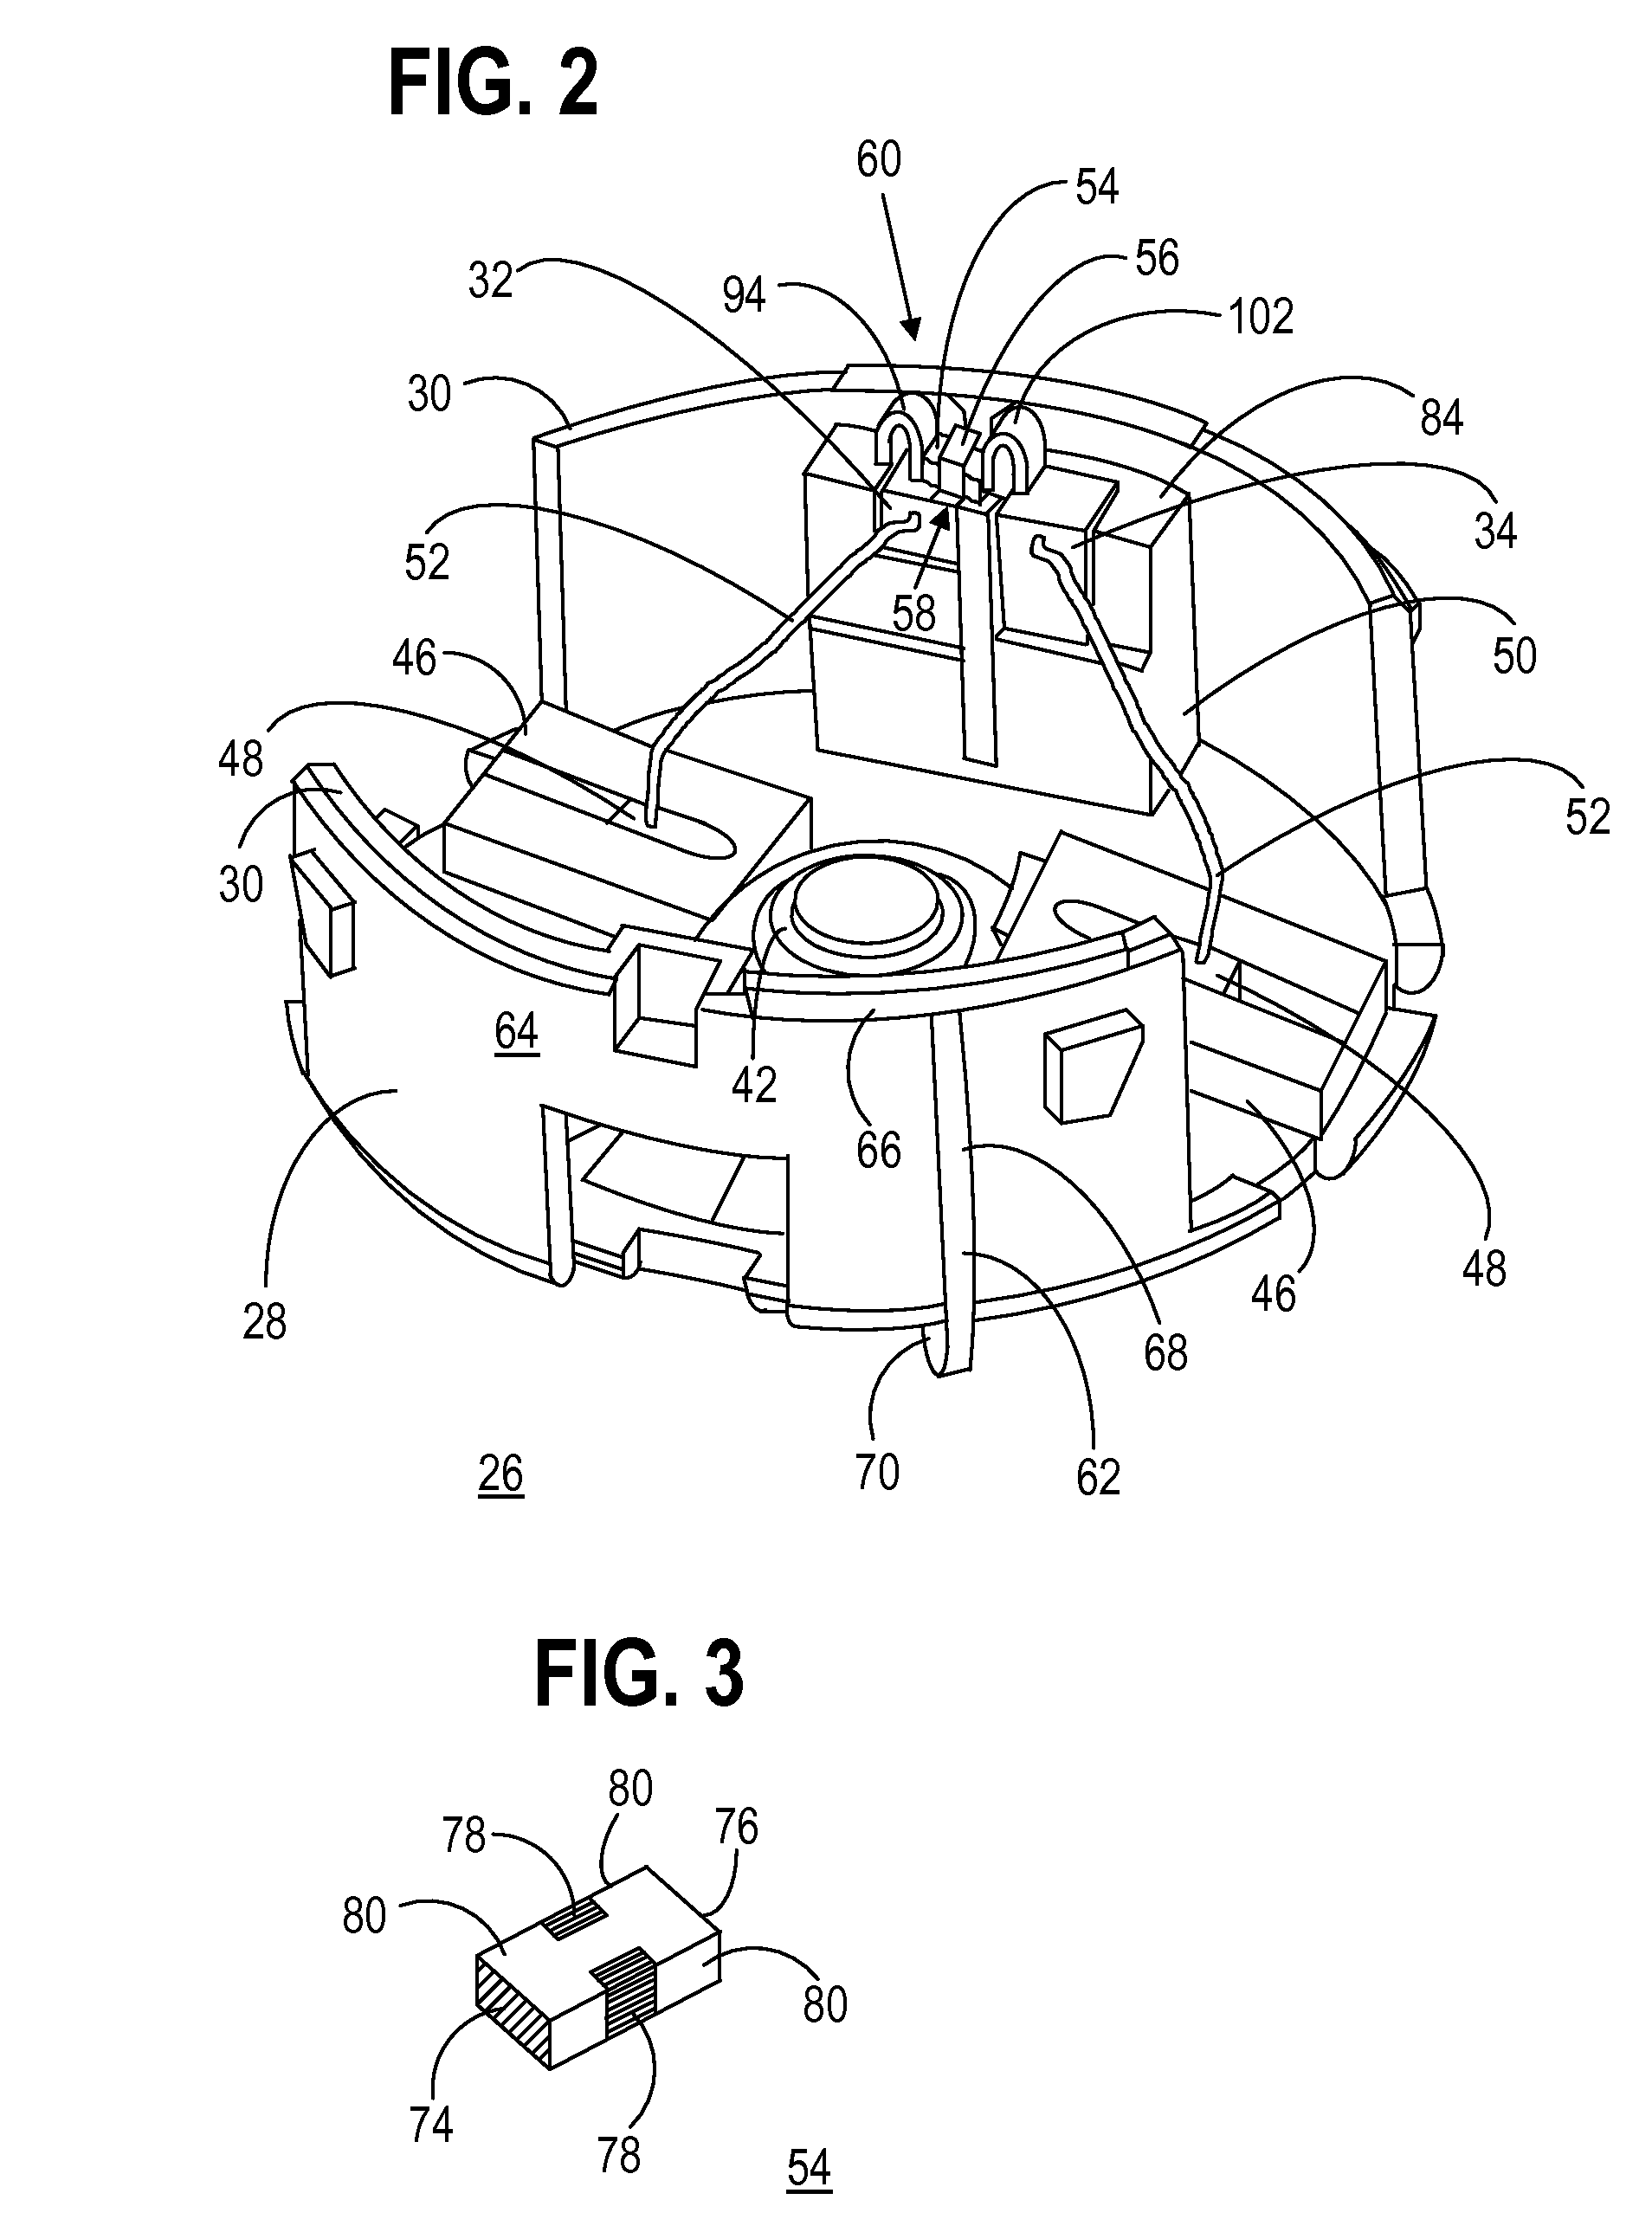 Motor assembly incorporating a securely positioned electromagnetic disturubance suppression device